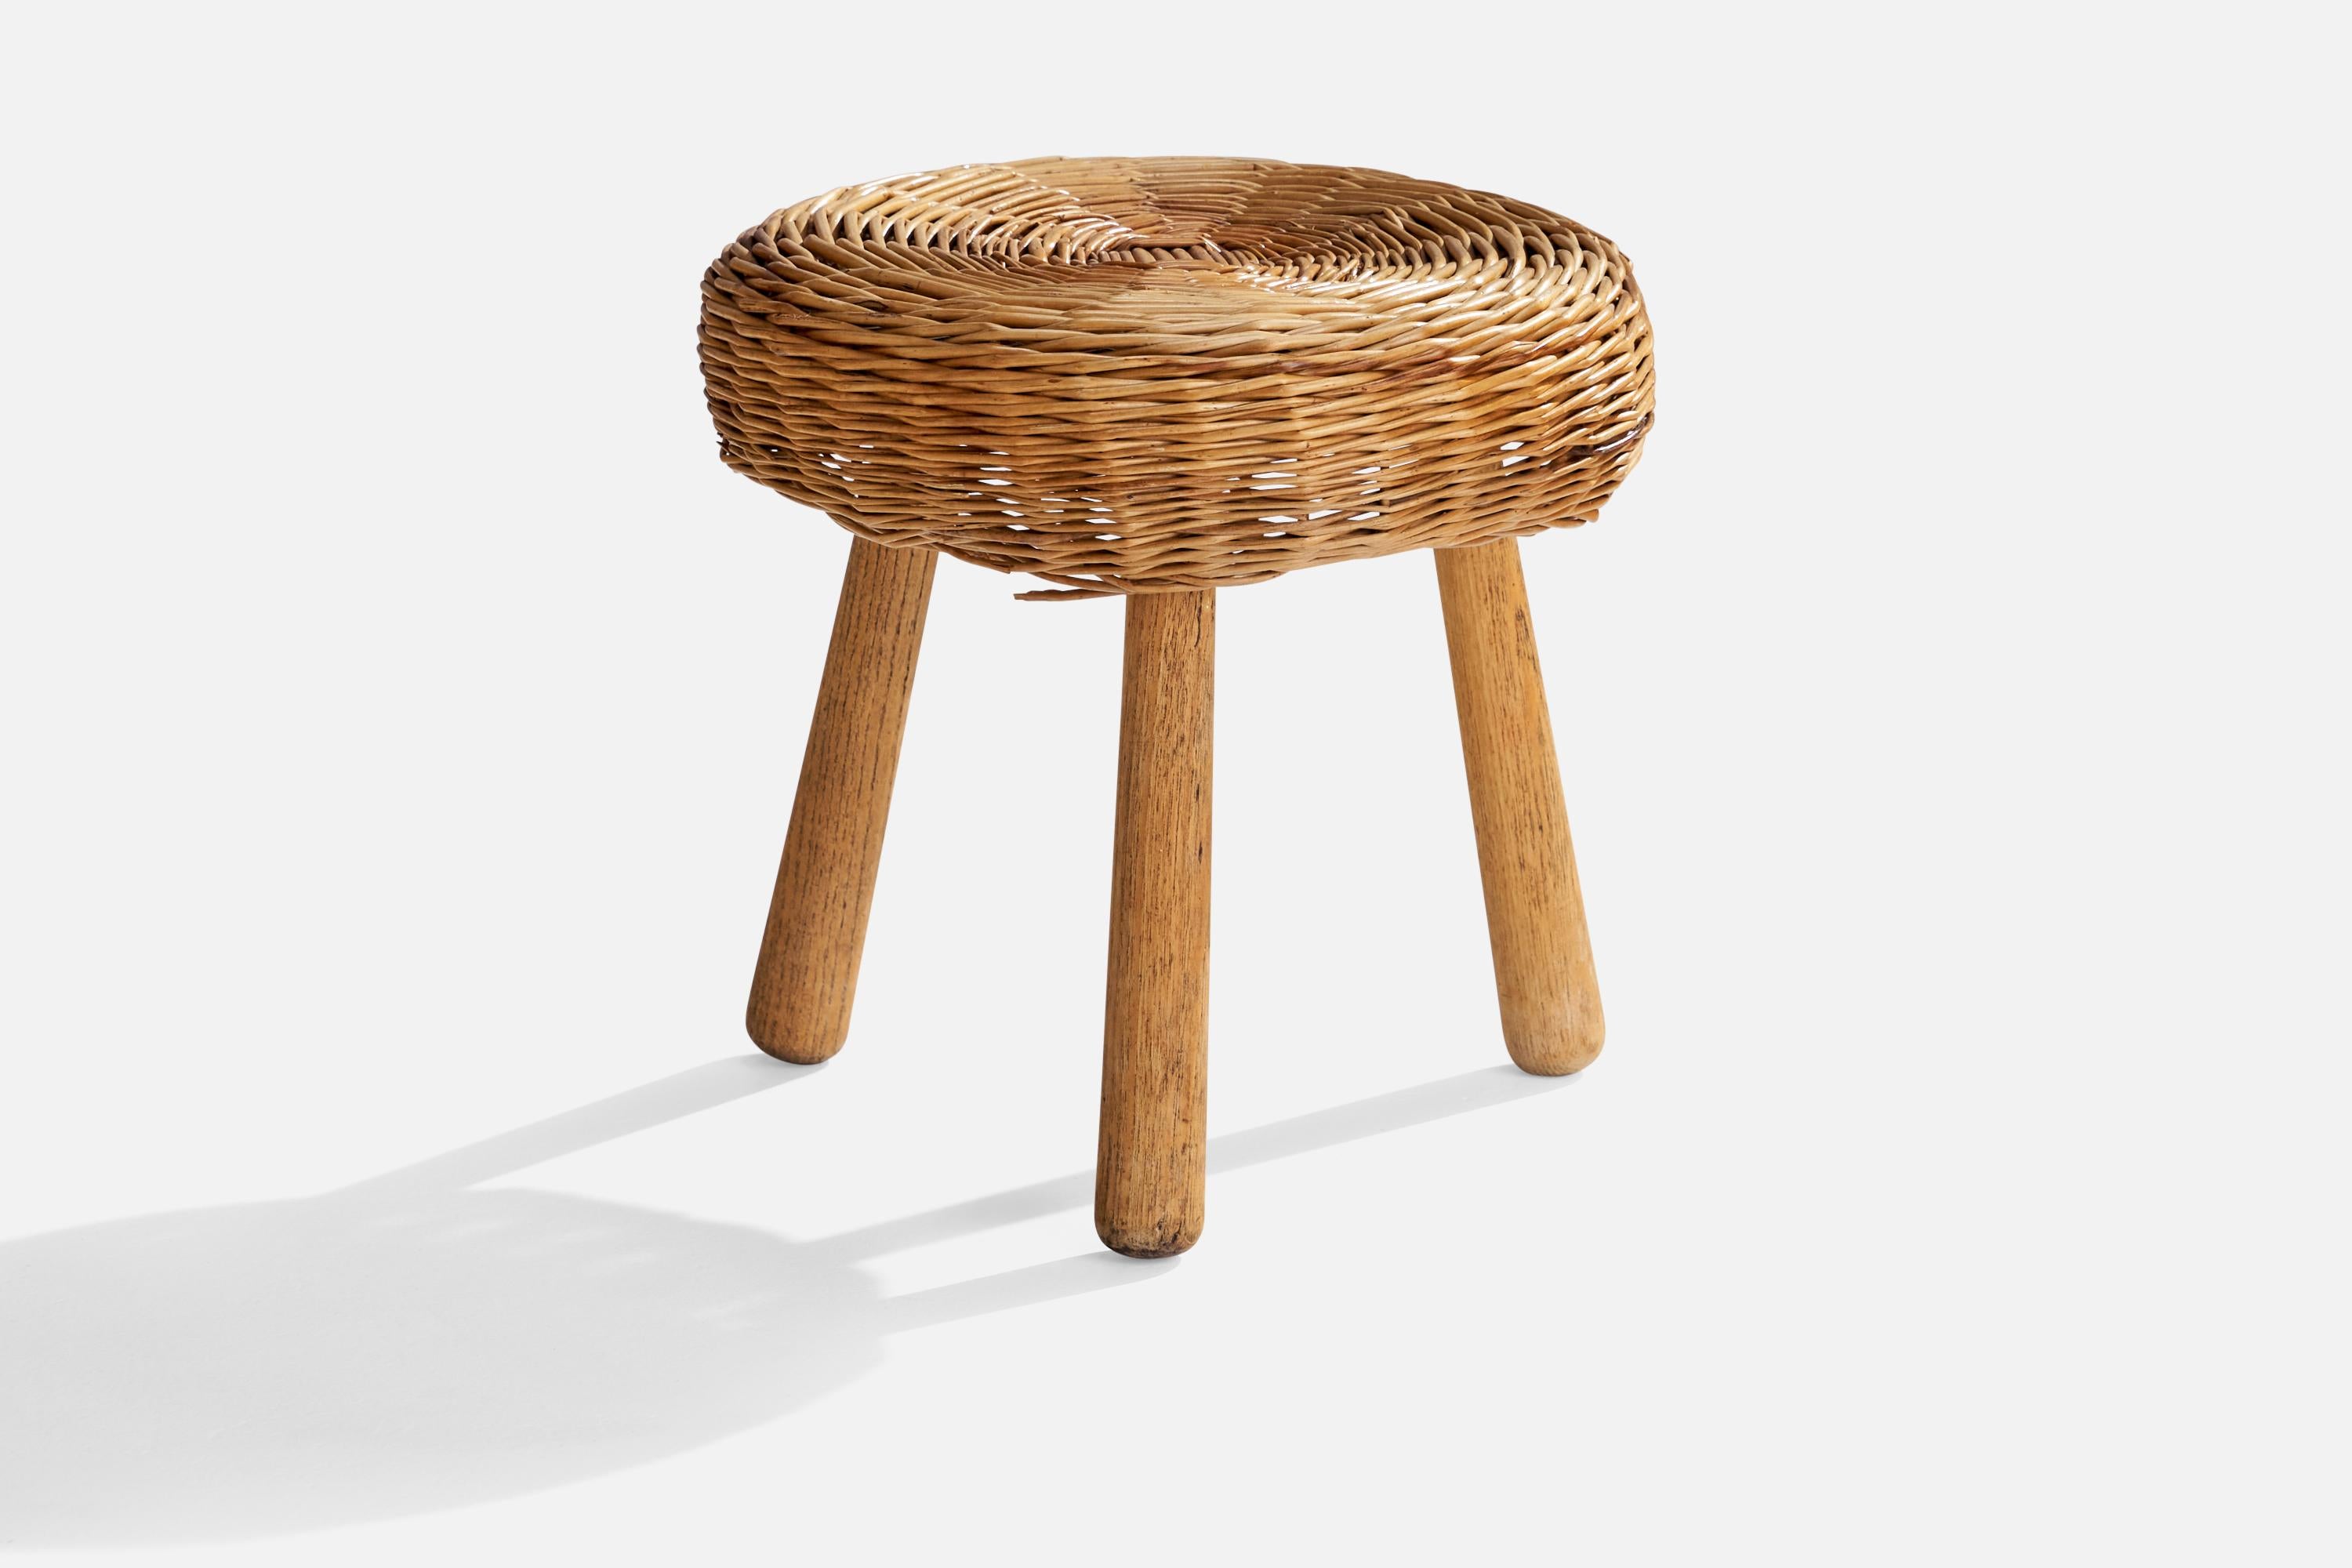 A wood and rattan stool attributed to Tony Paul, USA, c. 1950s.

seat height 11.25.